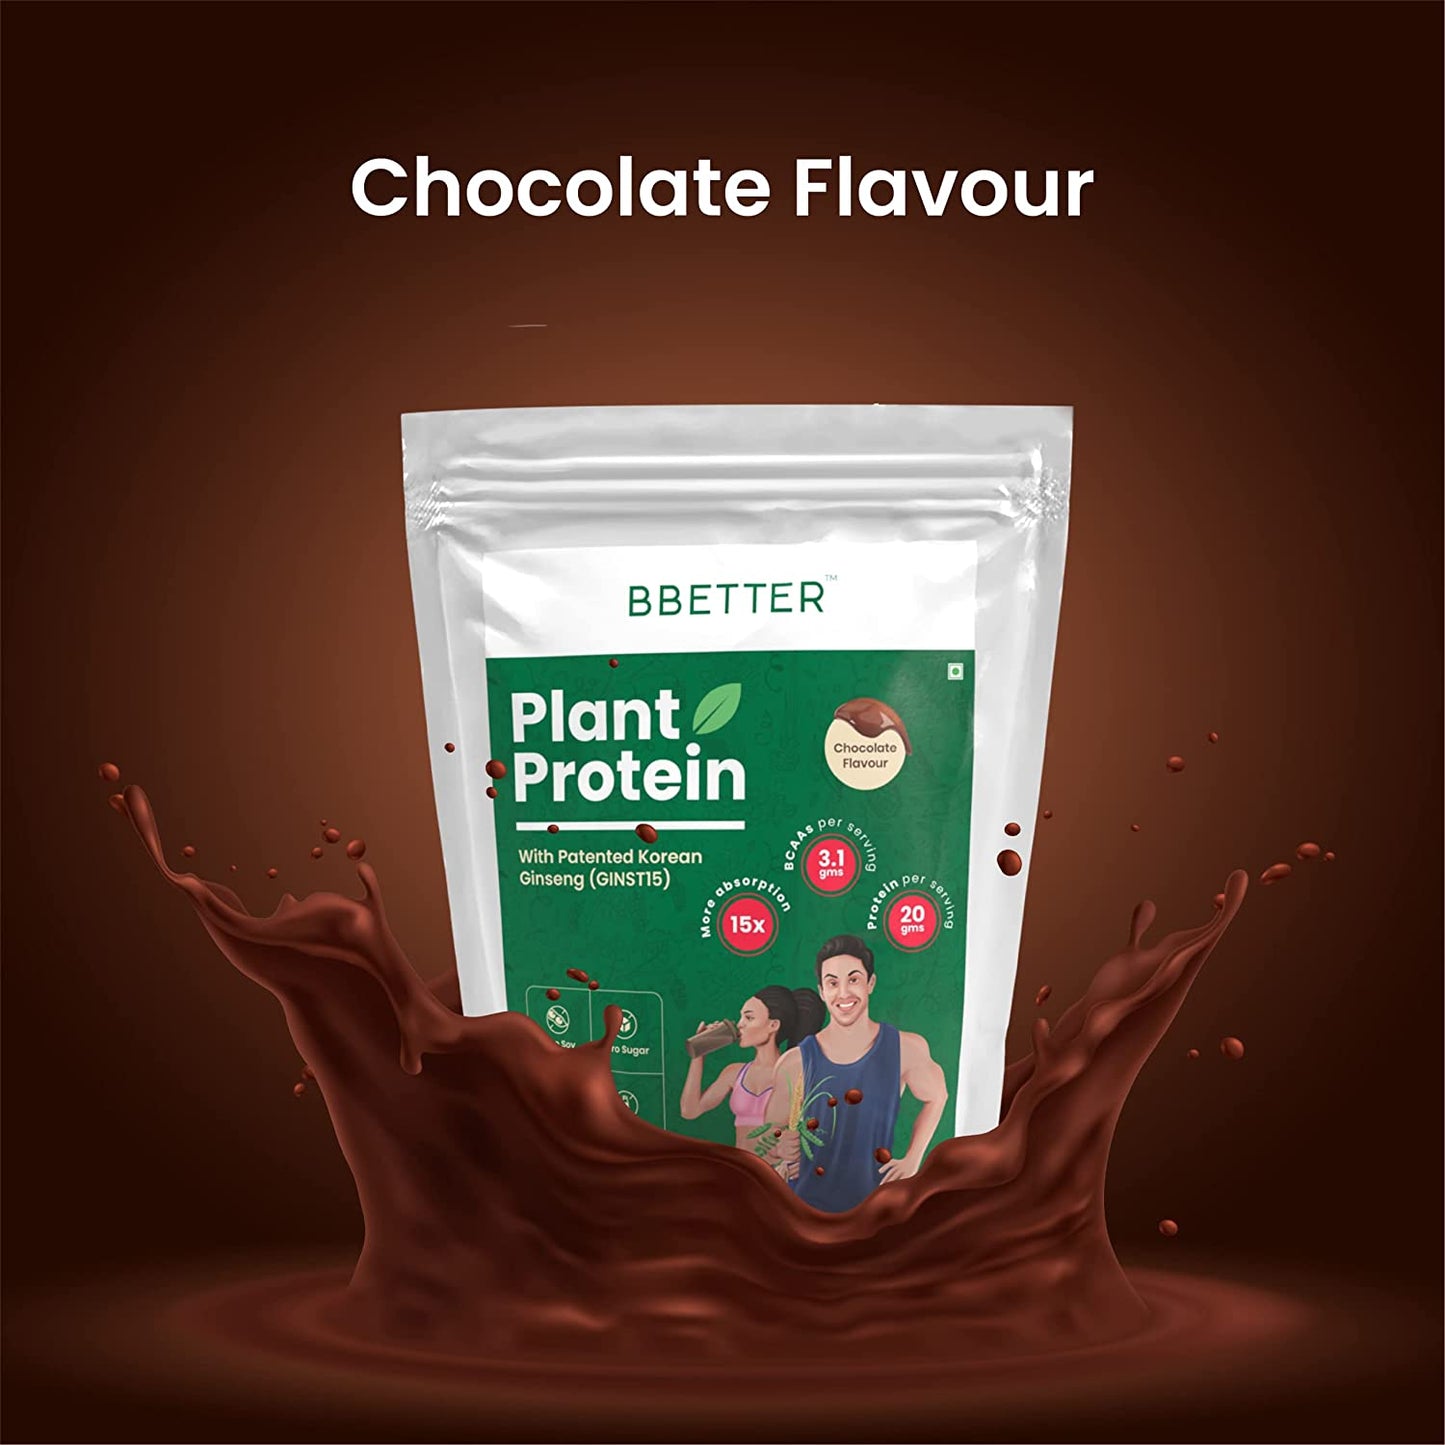 BBETTER Plant Protein for Men & Women | Enriched with Patented Korean Ginseng | 100% Vegan Protein Powder with NO ADDED SUGAR | Whey Protein Alternative with 20g Protein per serving | Chocolate Flavour